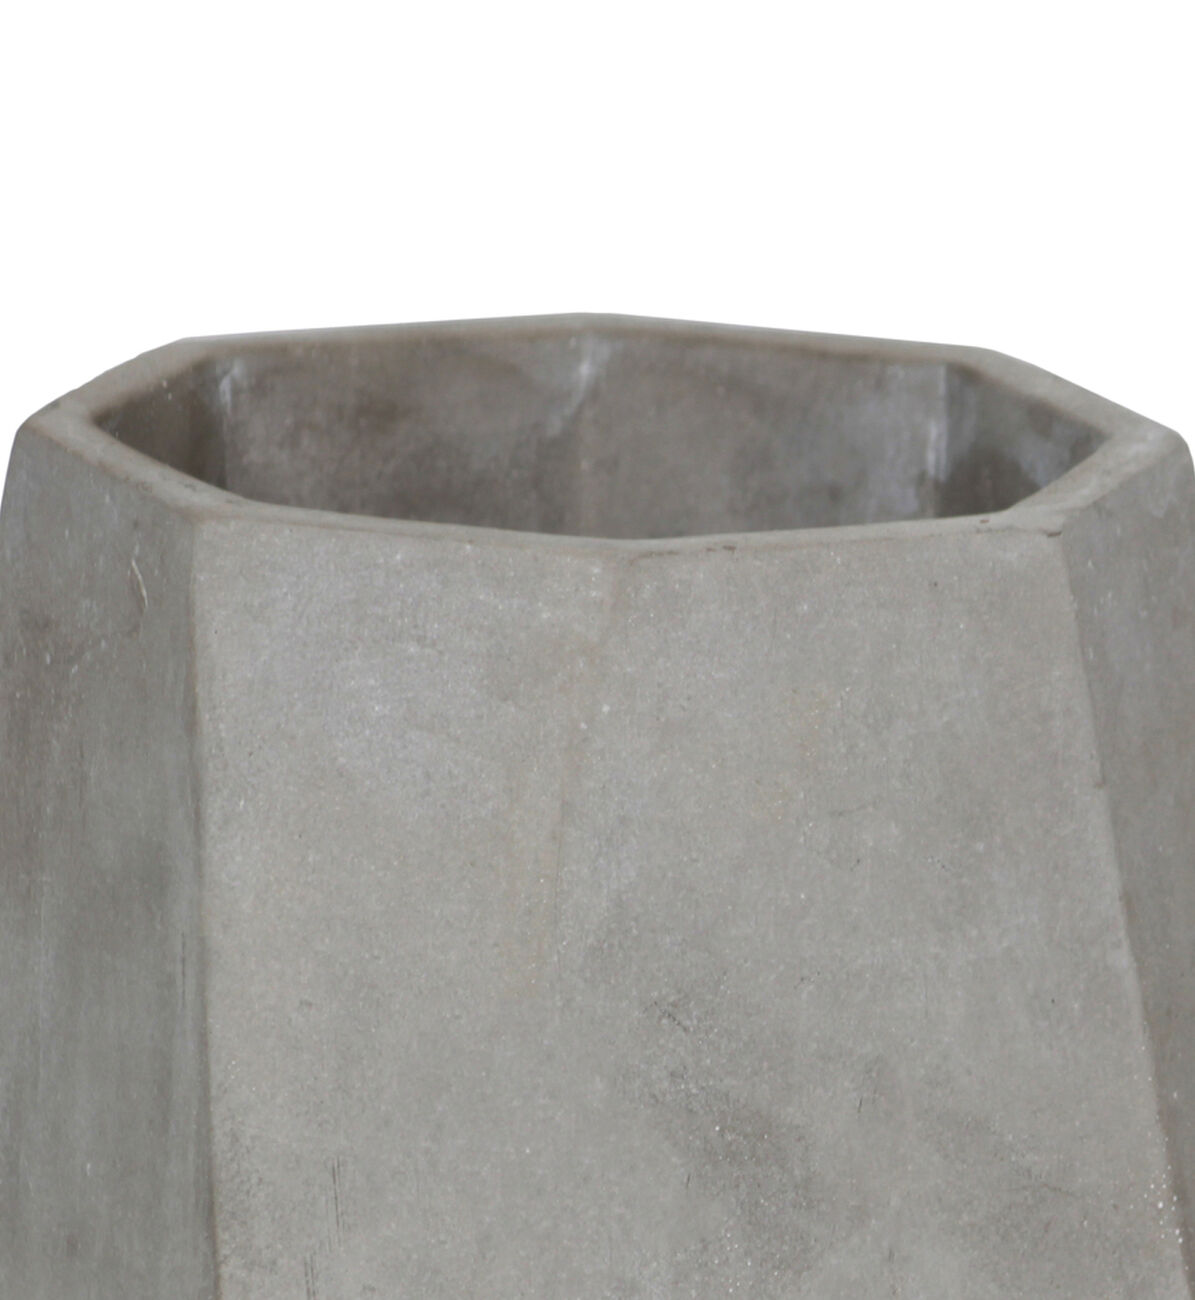 Cement Flower Pot with Flared Base and Octagonal Top, Large, Gray